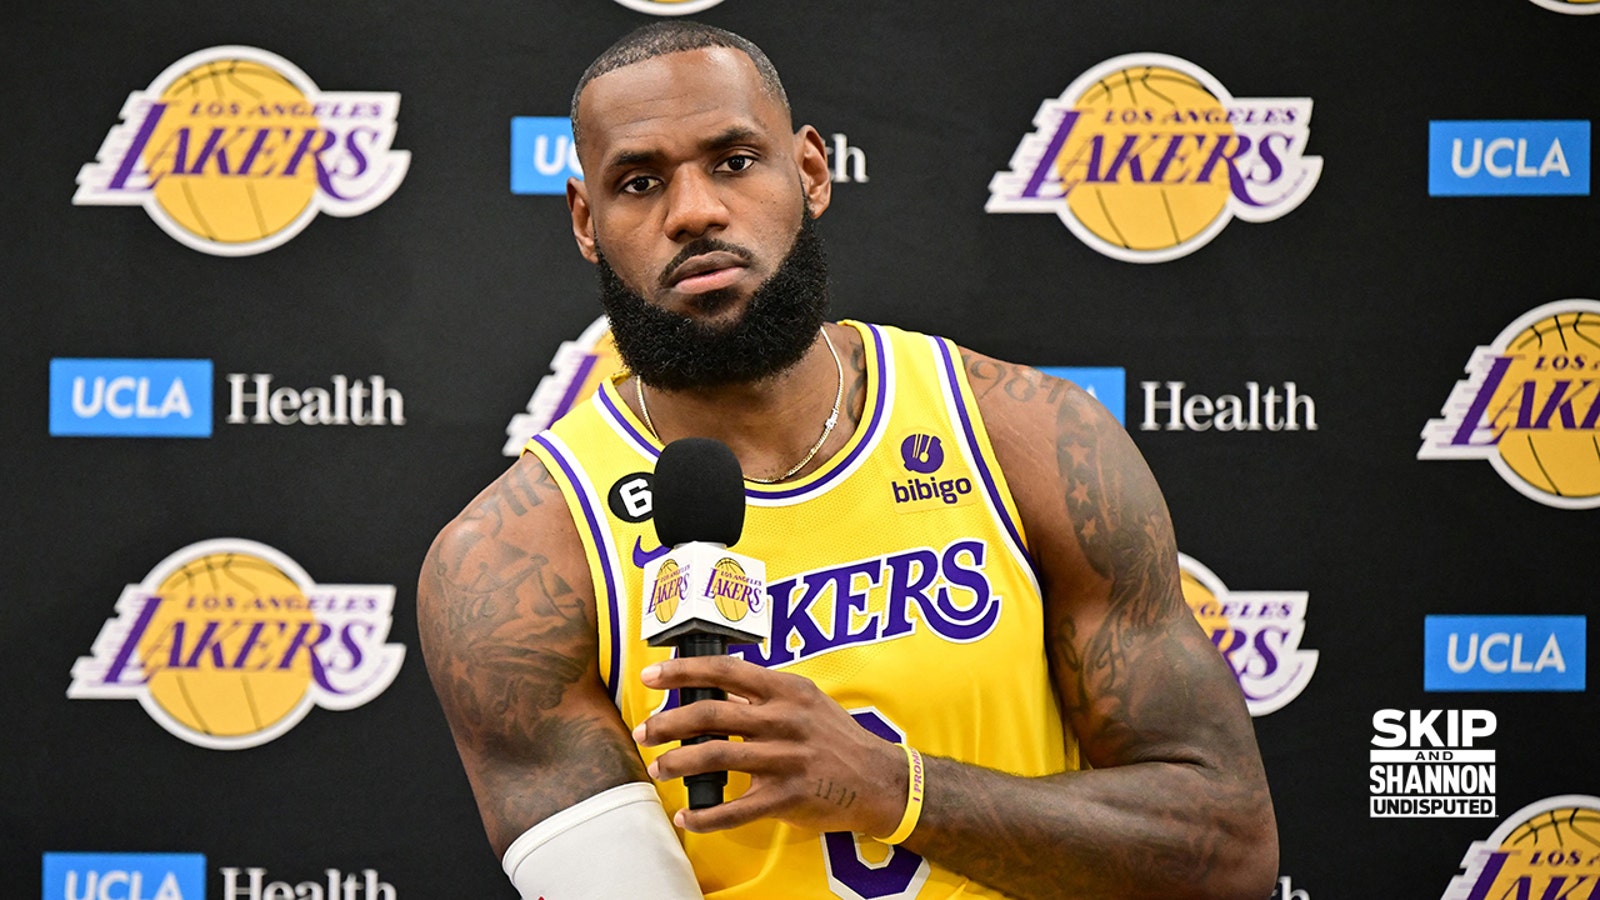 LeBron James campaigns to own an NBA franchise in Las Vegas